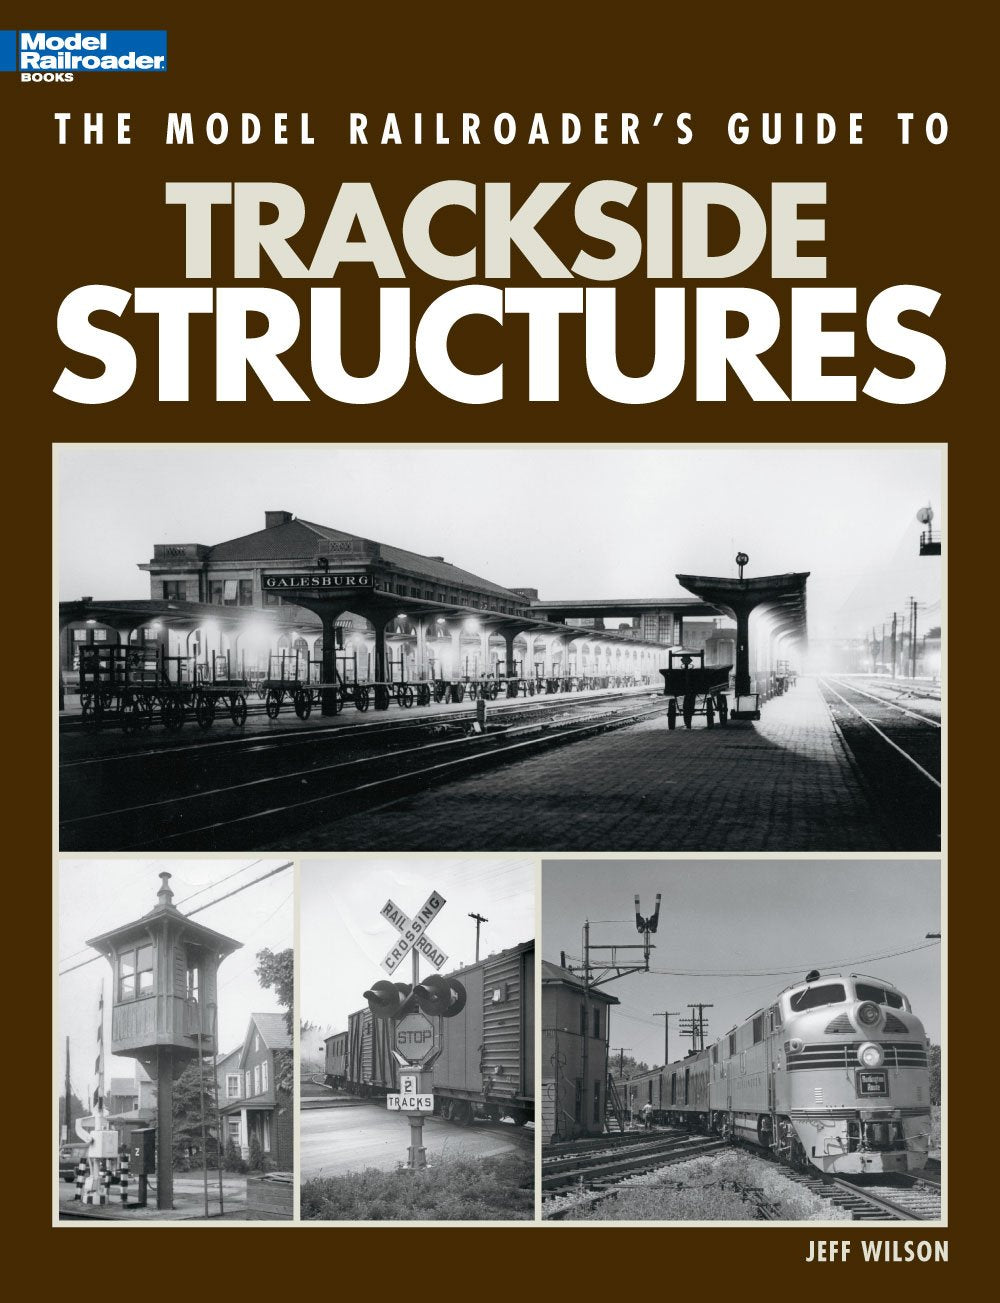 The Model Railroader's Guide to Trackside Structures #12436 Book Wilson Lots Pix